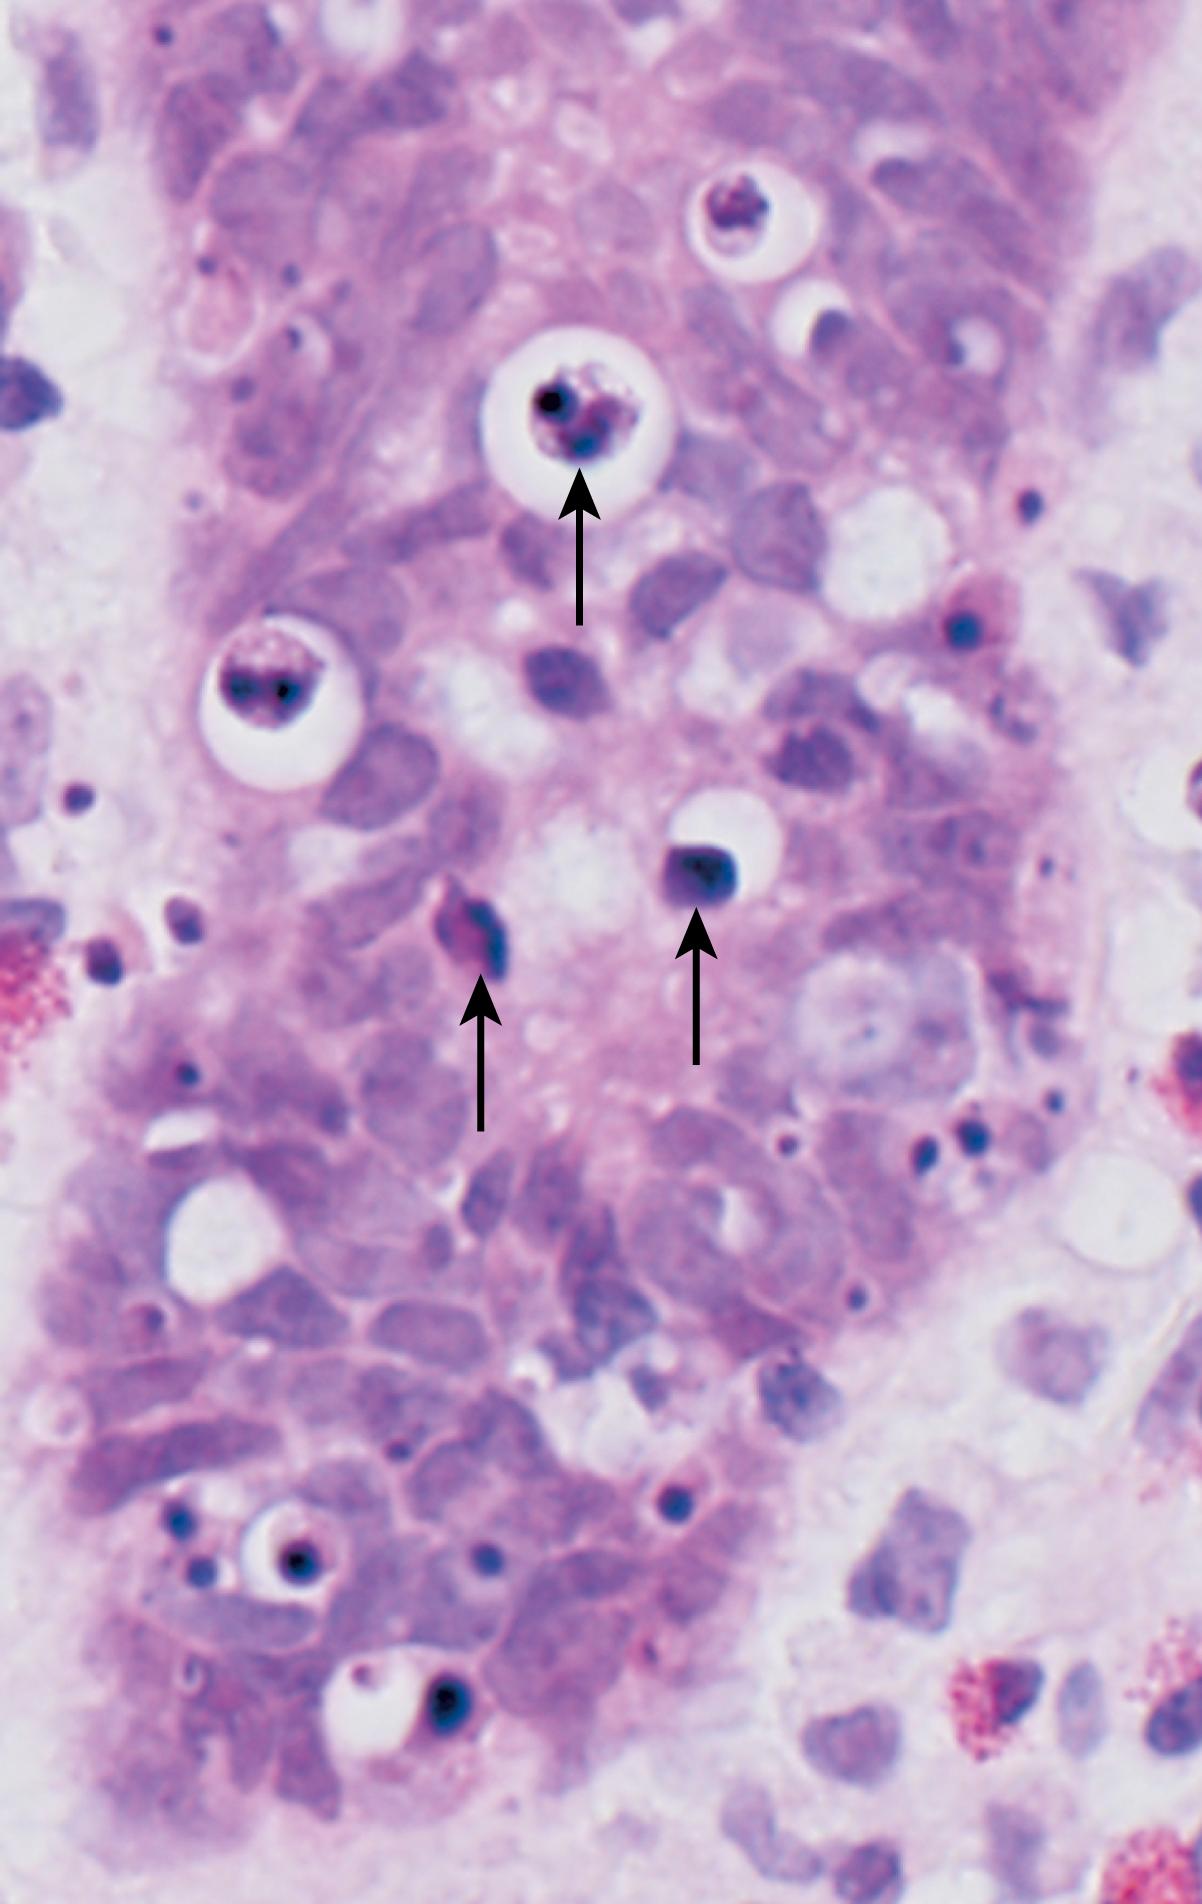 FIG. 1.13, Morphologic appearance of apoptotic cells. Apoptotic cells (some indicated by arrows ) in a normal crypt in the colonic epithelium are shown. (The preparative regimen for colonoscopy frequently induces apoptosis in epithelial cells, which explains the abundance of dead cells in this normal tissue.) Note the fragmented nuclei with condensed chromatin and the shrunken cell bodies, some with pieces falling off.